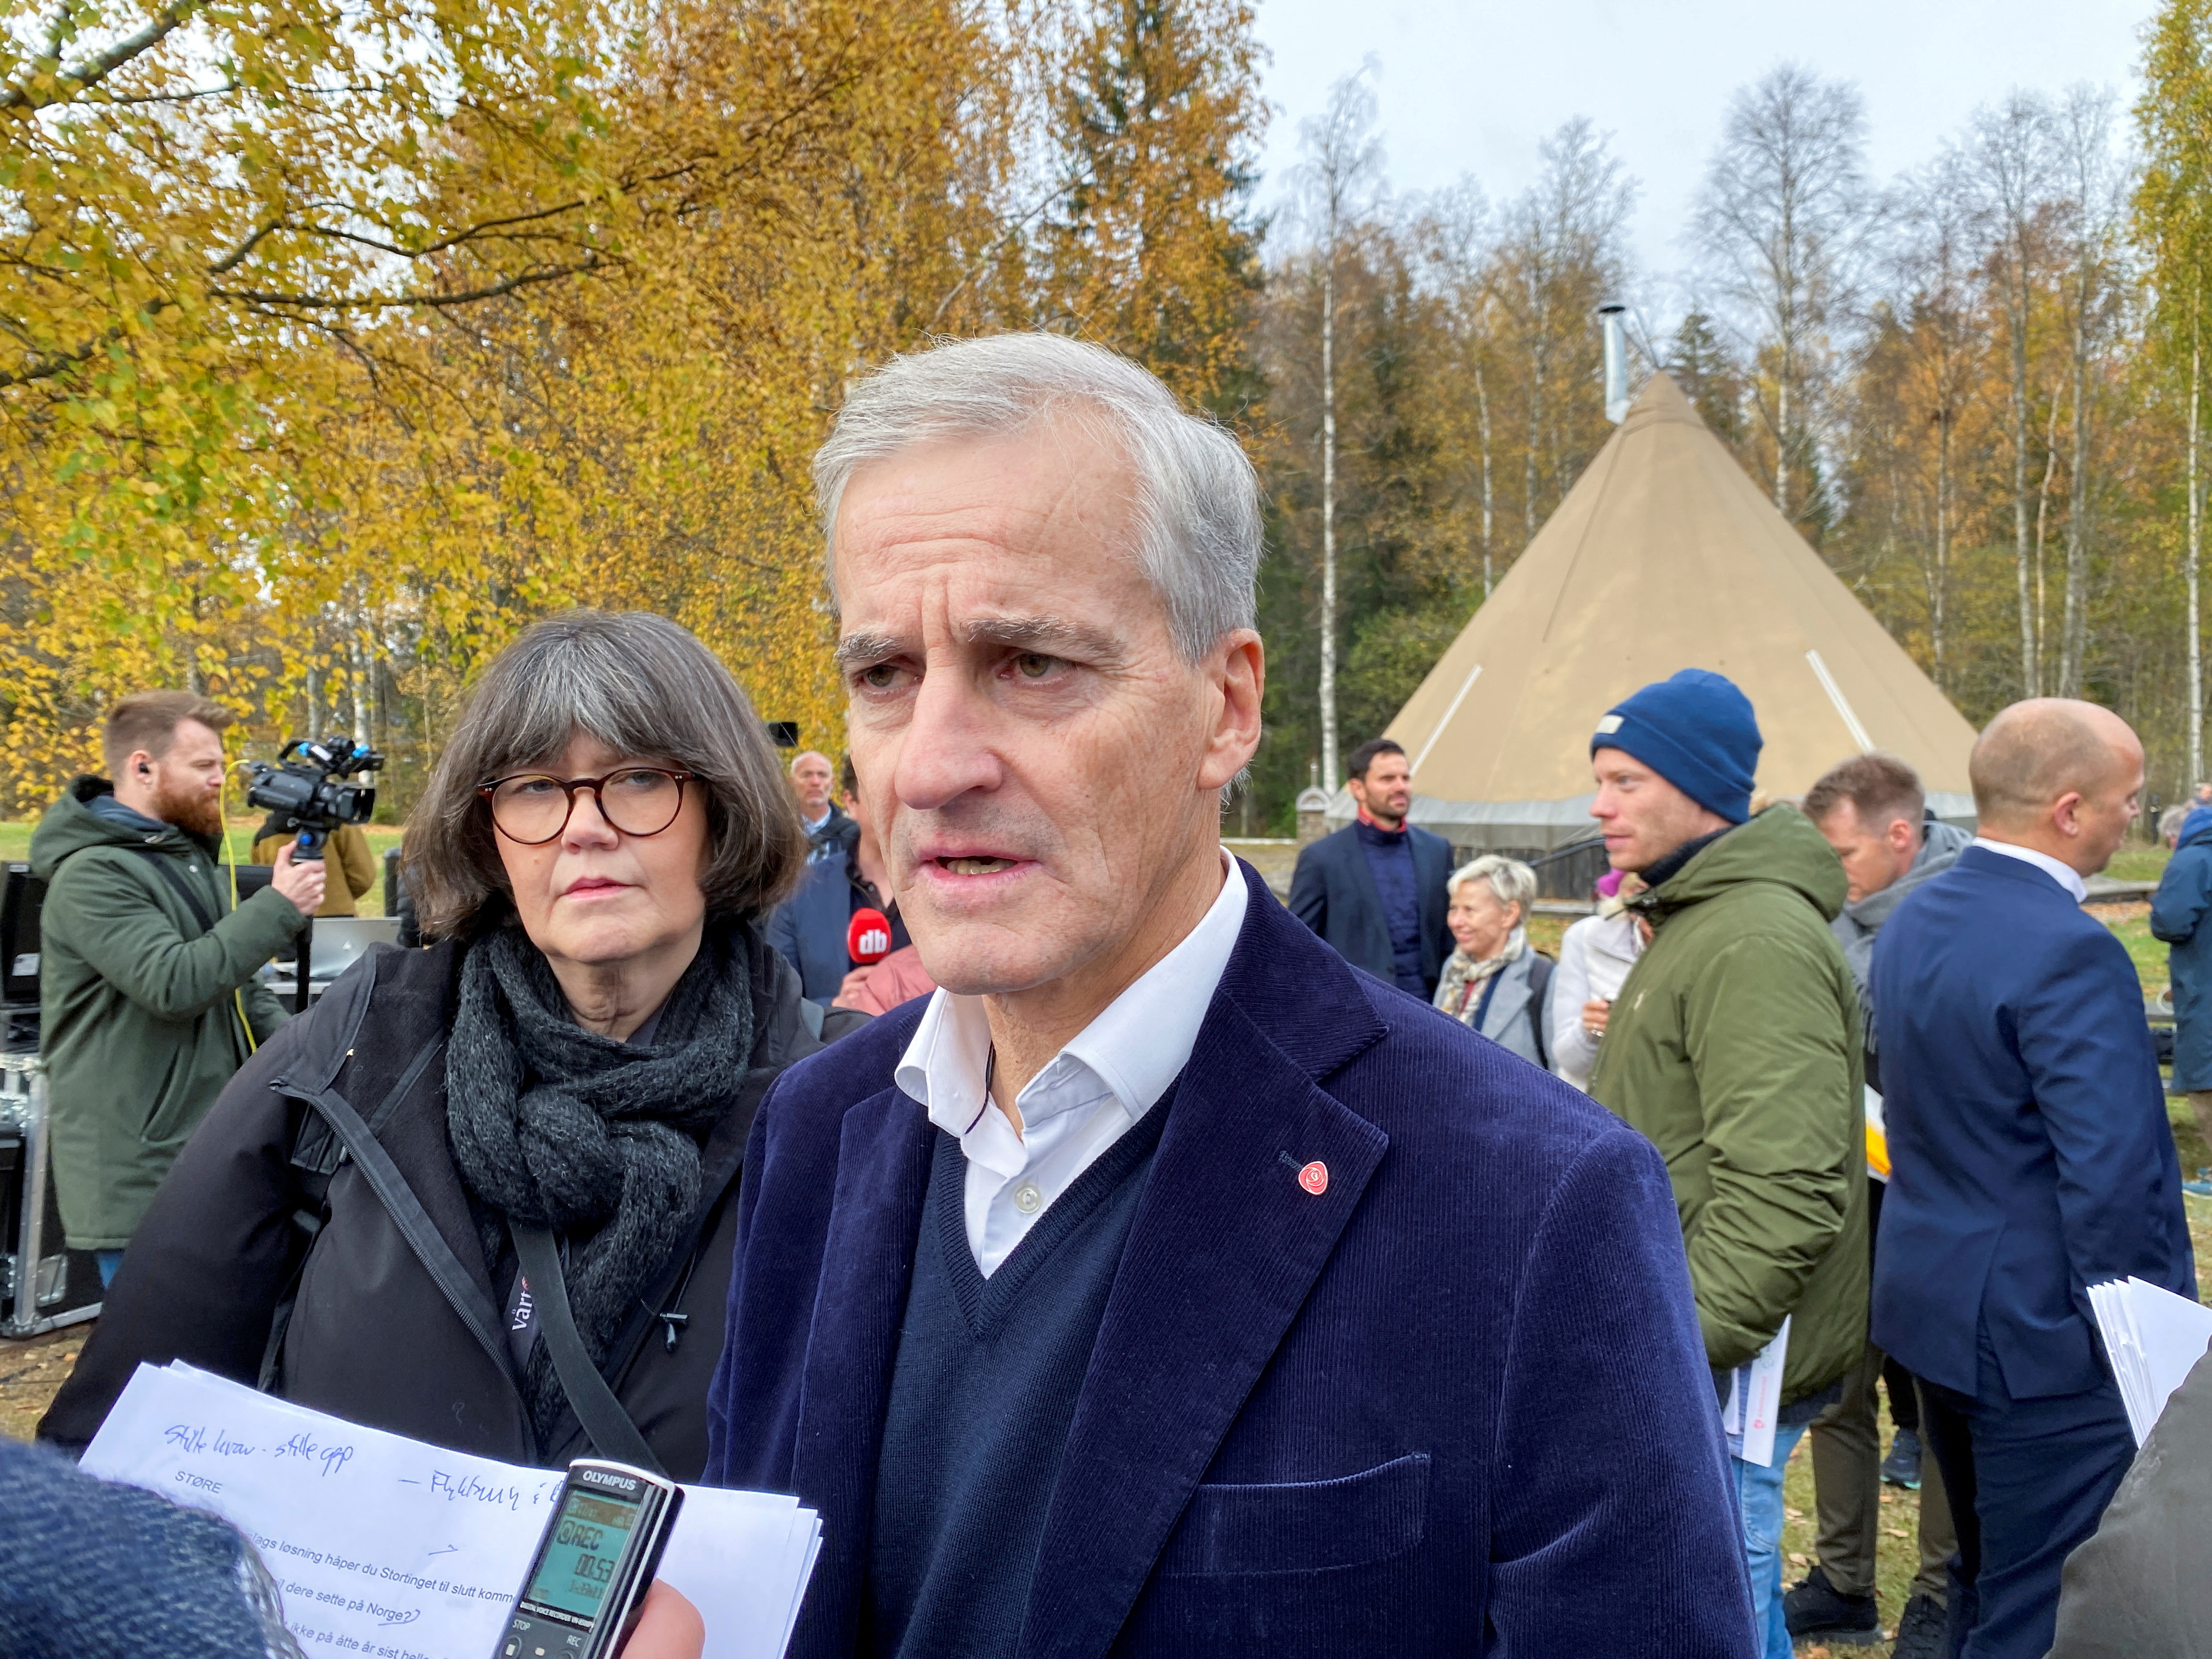 Norway's incoming Prime Minister and Labour leader Jonas Gahr Stoere speaks to a member of the media at a presentation of the incoming government's policies, in Hurdal, Norway October 13, 2021. REUTERS/Victoria Klesty